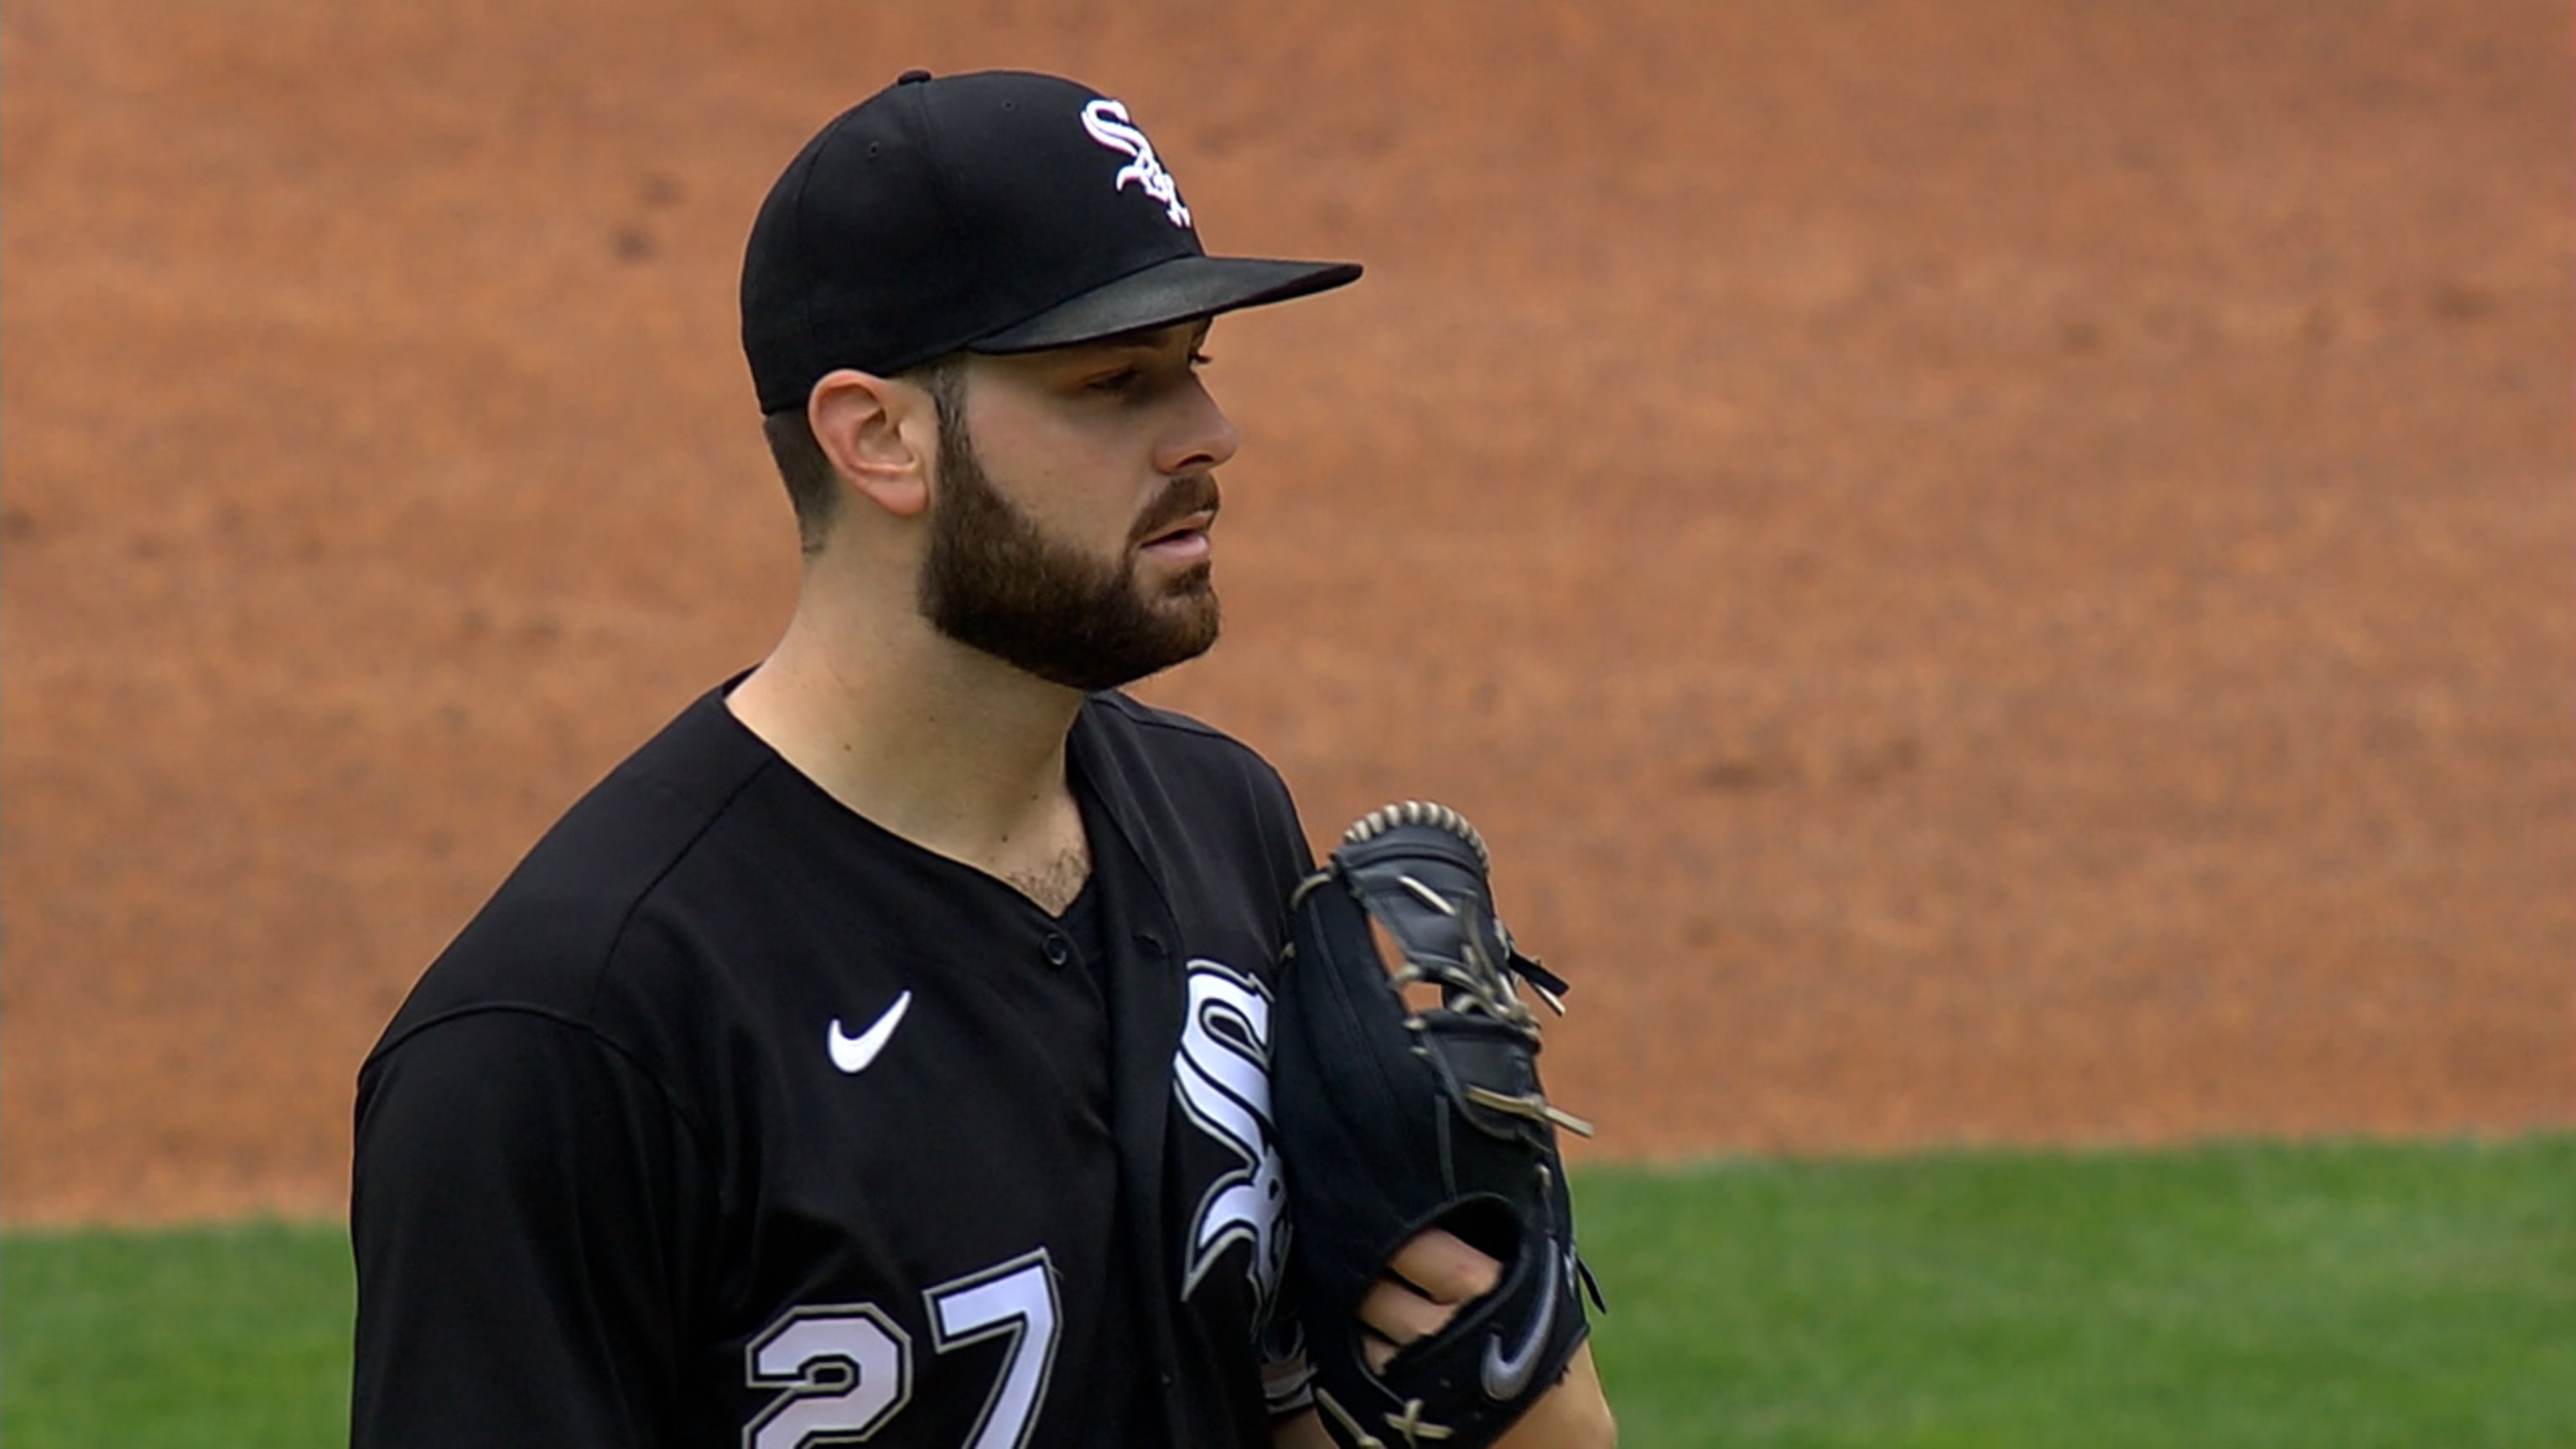 Giolito, Flaherty watch prep teammate Fried in World Series Game Six